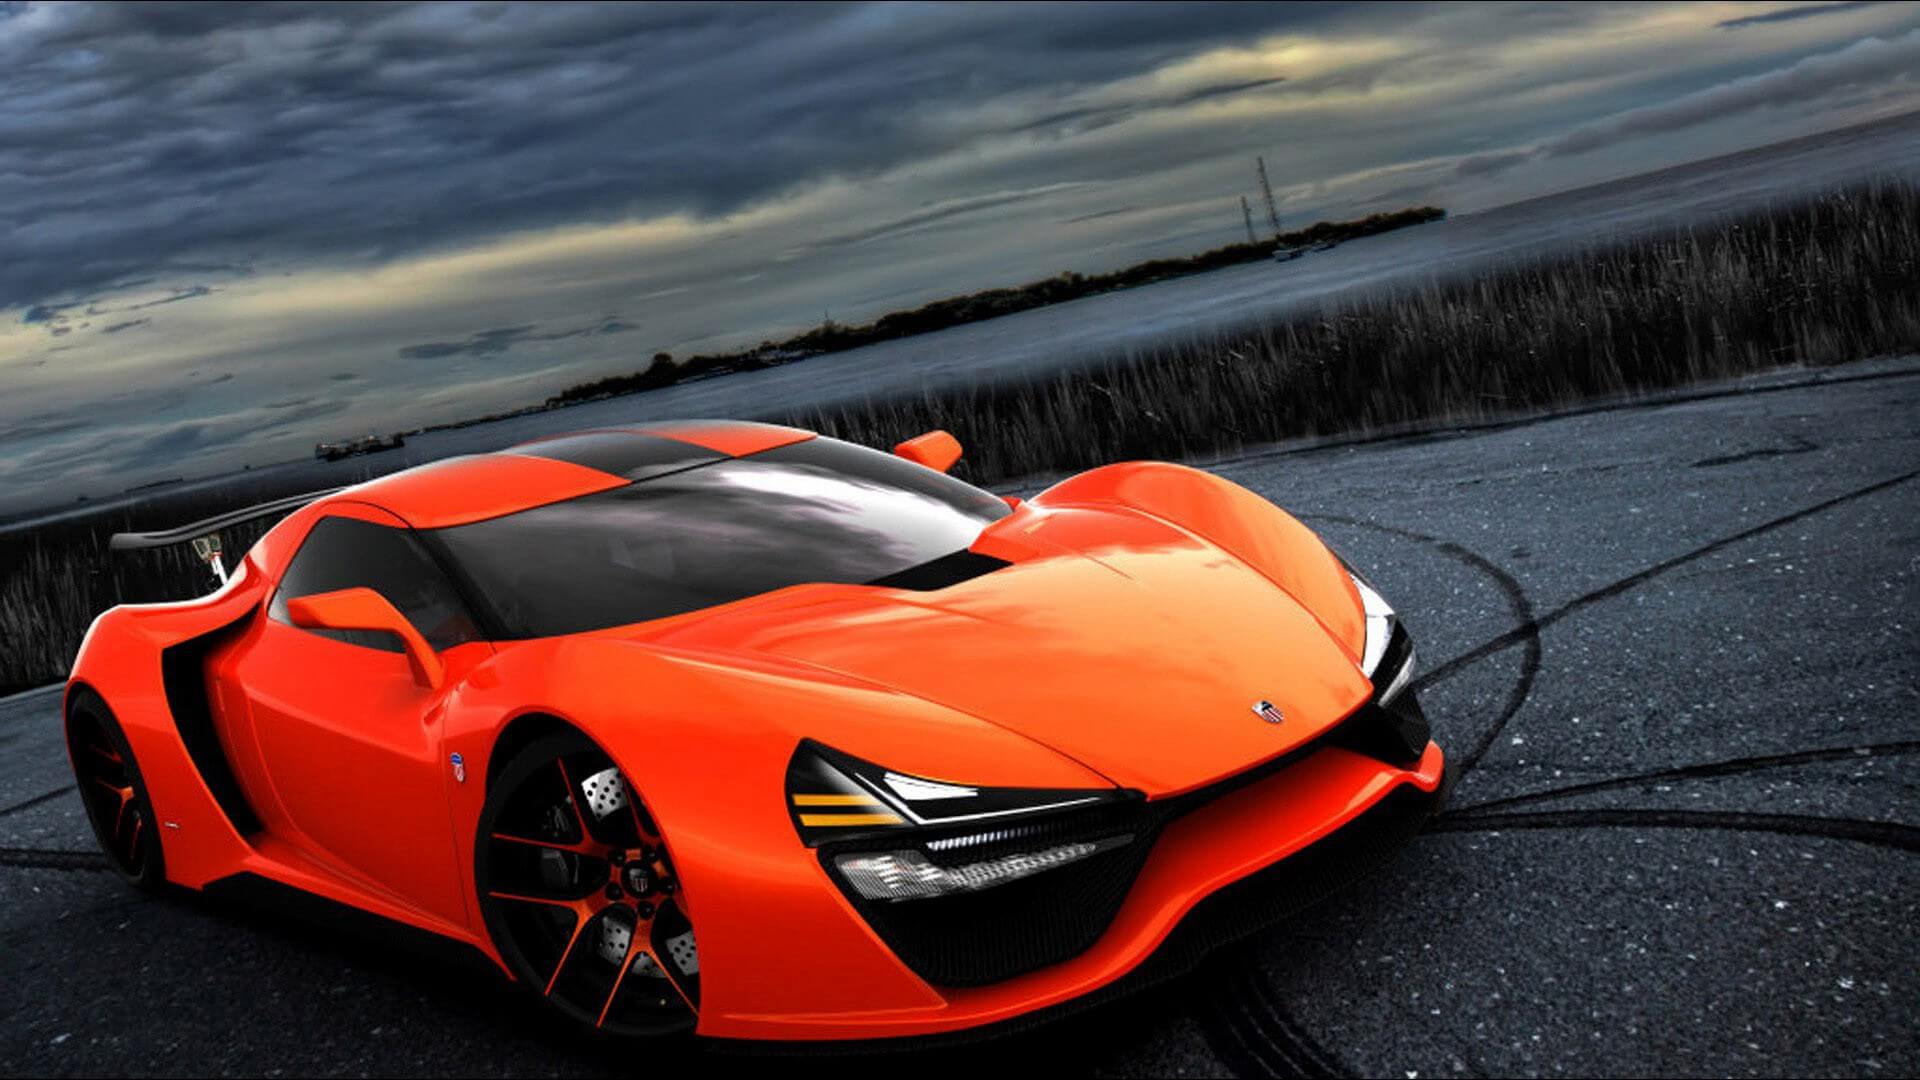 Trion Nemesis is a machine with 2000 horsepower on board